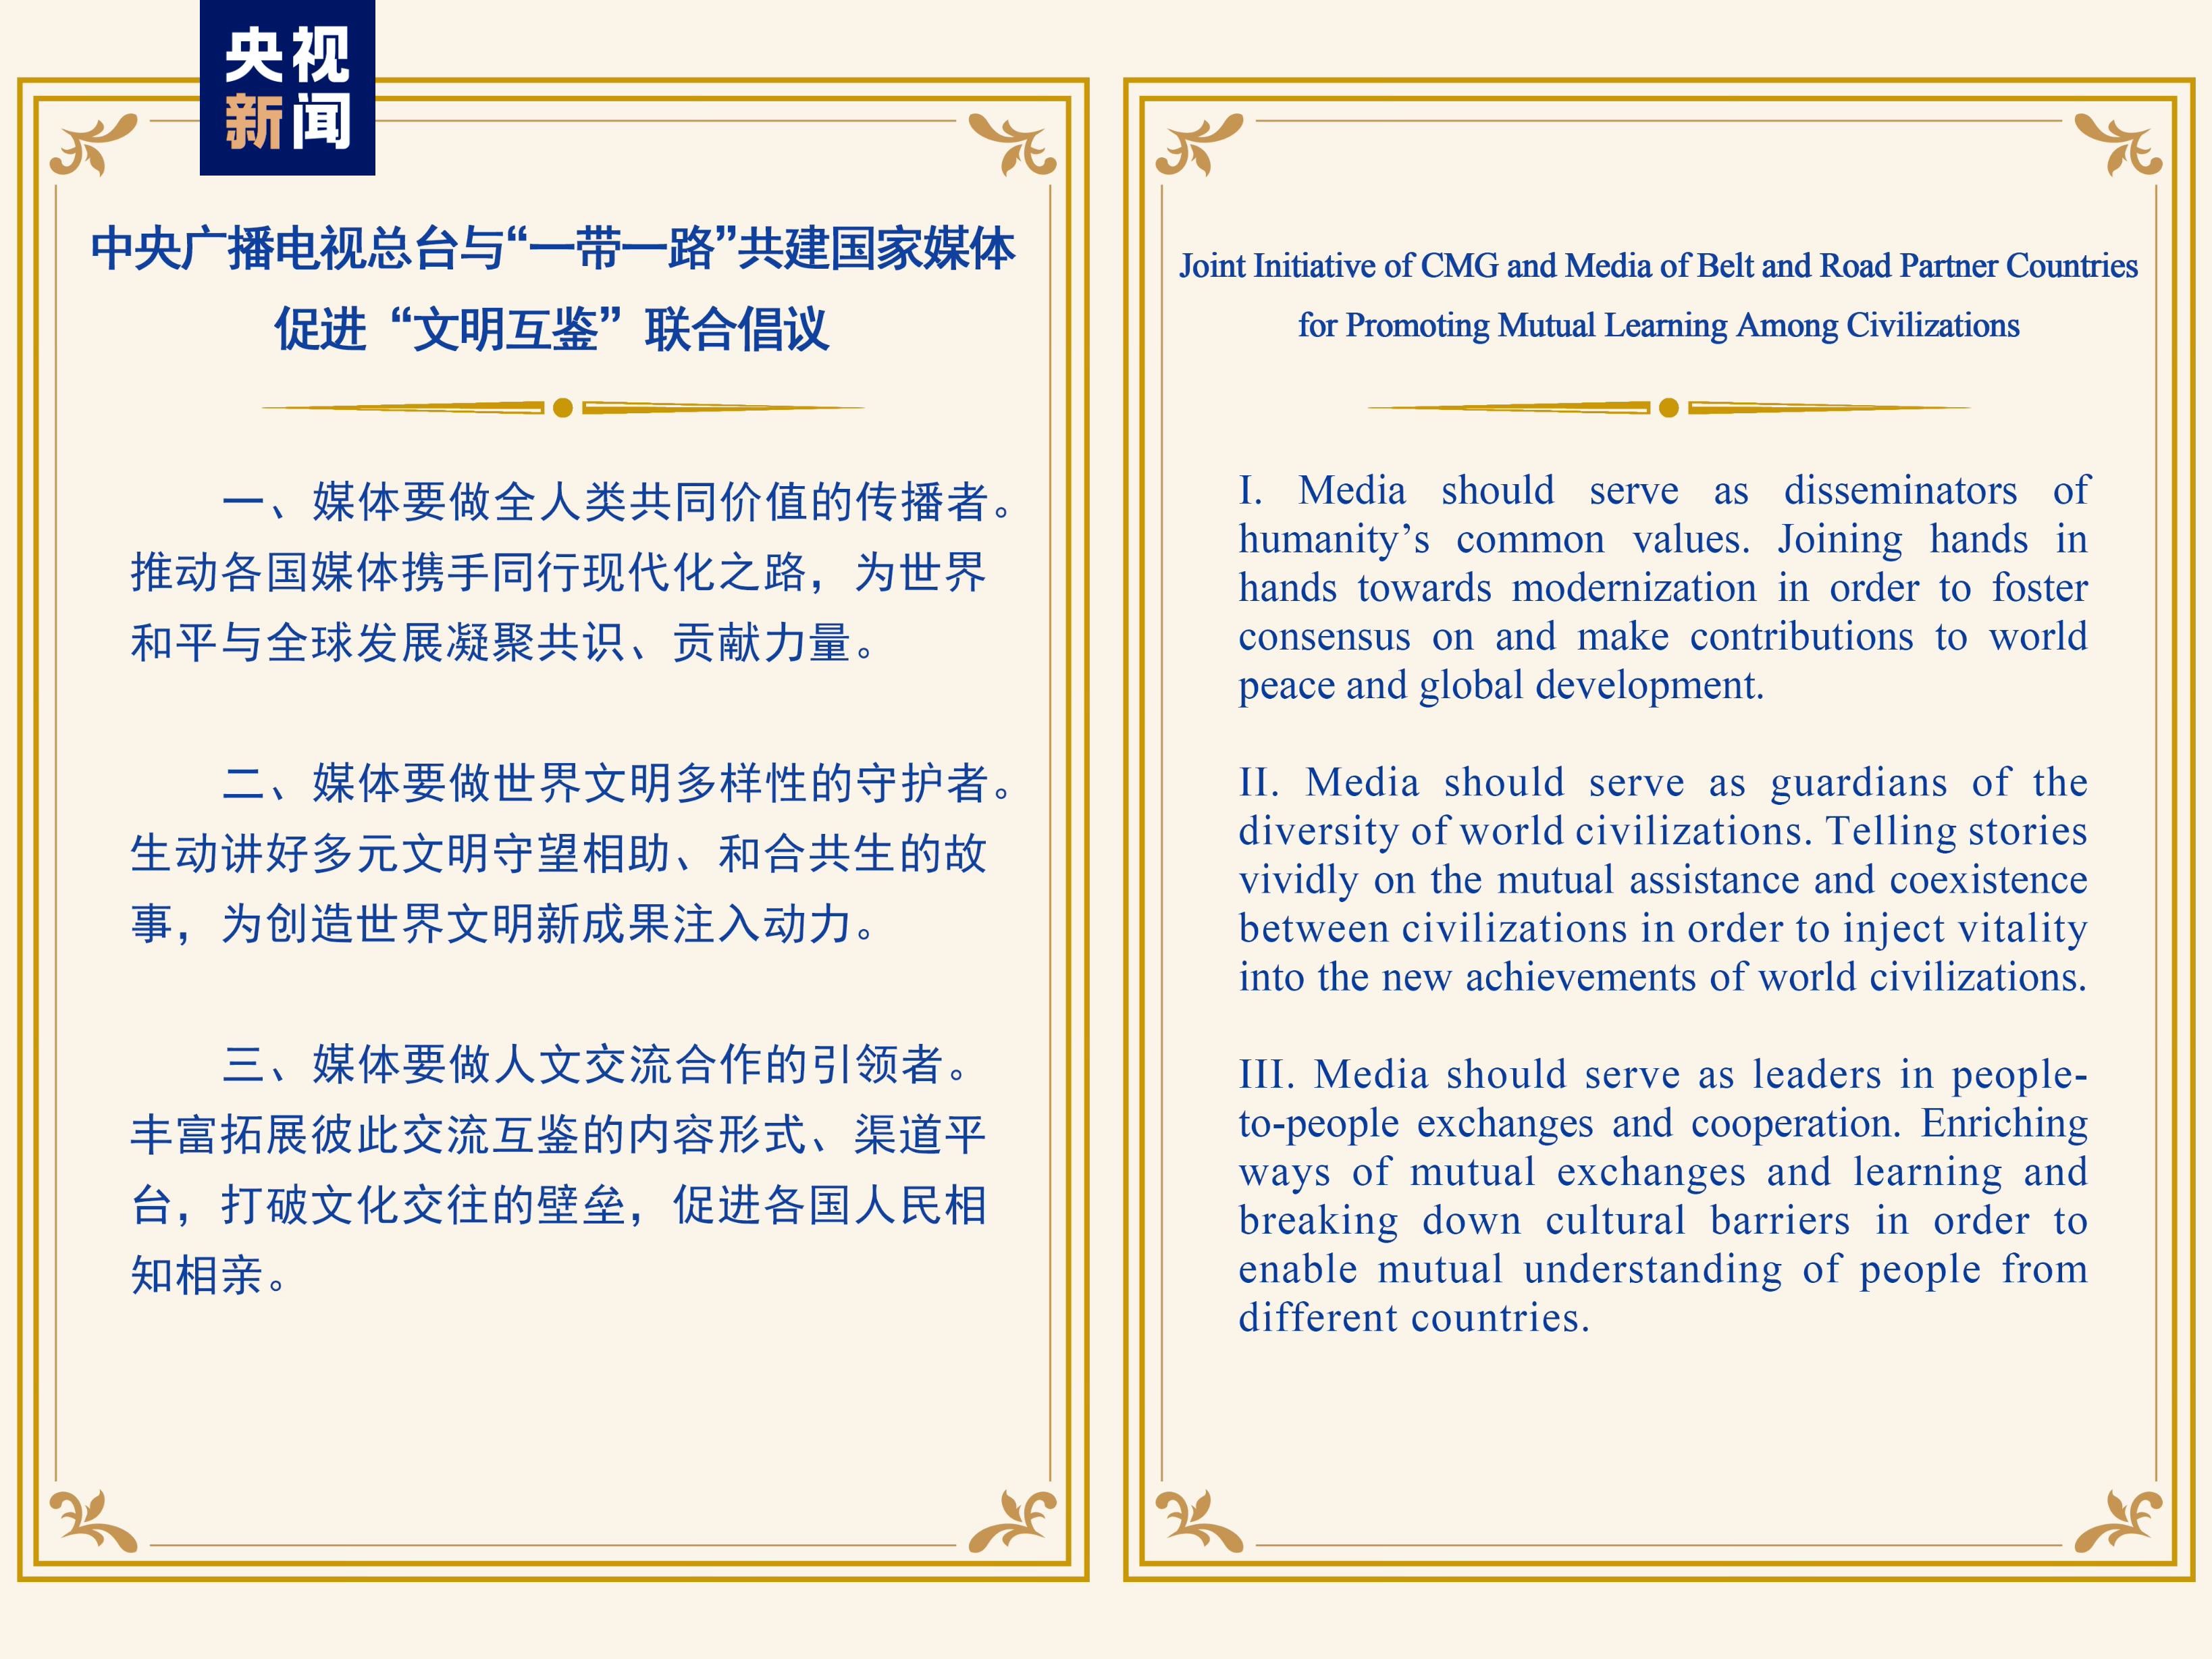 The Chinese and English versions of the Joint Initiative of CMG and Media of Belt and Road Partner Countries for Promoting Mutual Learning Among Civilization. /CMG